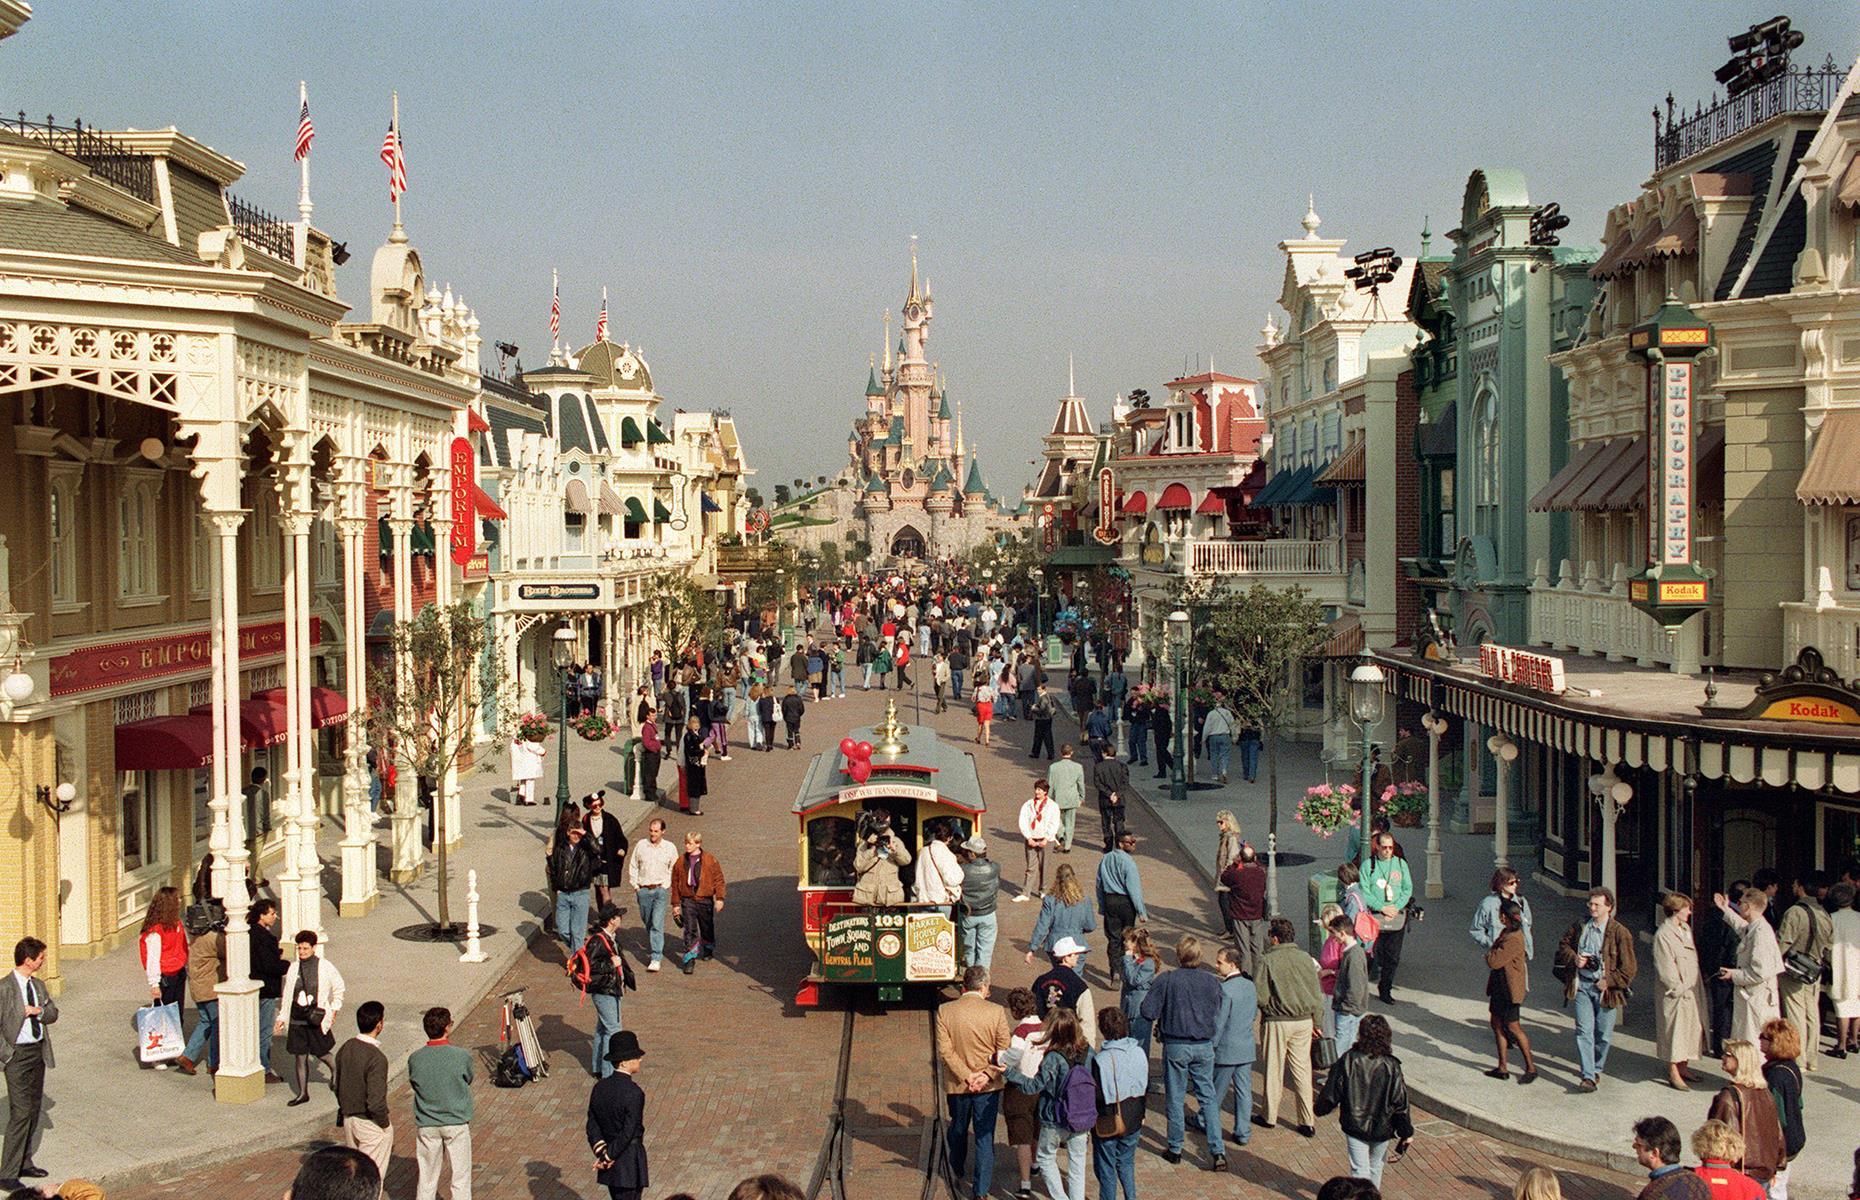 <p>From Florida to Paris, Disney's larger-than-life theme parks attract millions of visitors each year. With the oldest park dating back to the 1950s, these whimsical worlds have changed considerably through the decades.</p>  <p><strong>To celebrate Walt Disney World in Florida having recently celebrated its 50th anniversary, click or scroll through to take a look at Disney through the ages with 46 nostalgic photos.</strong></p>